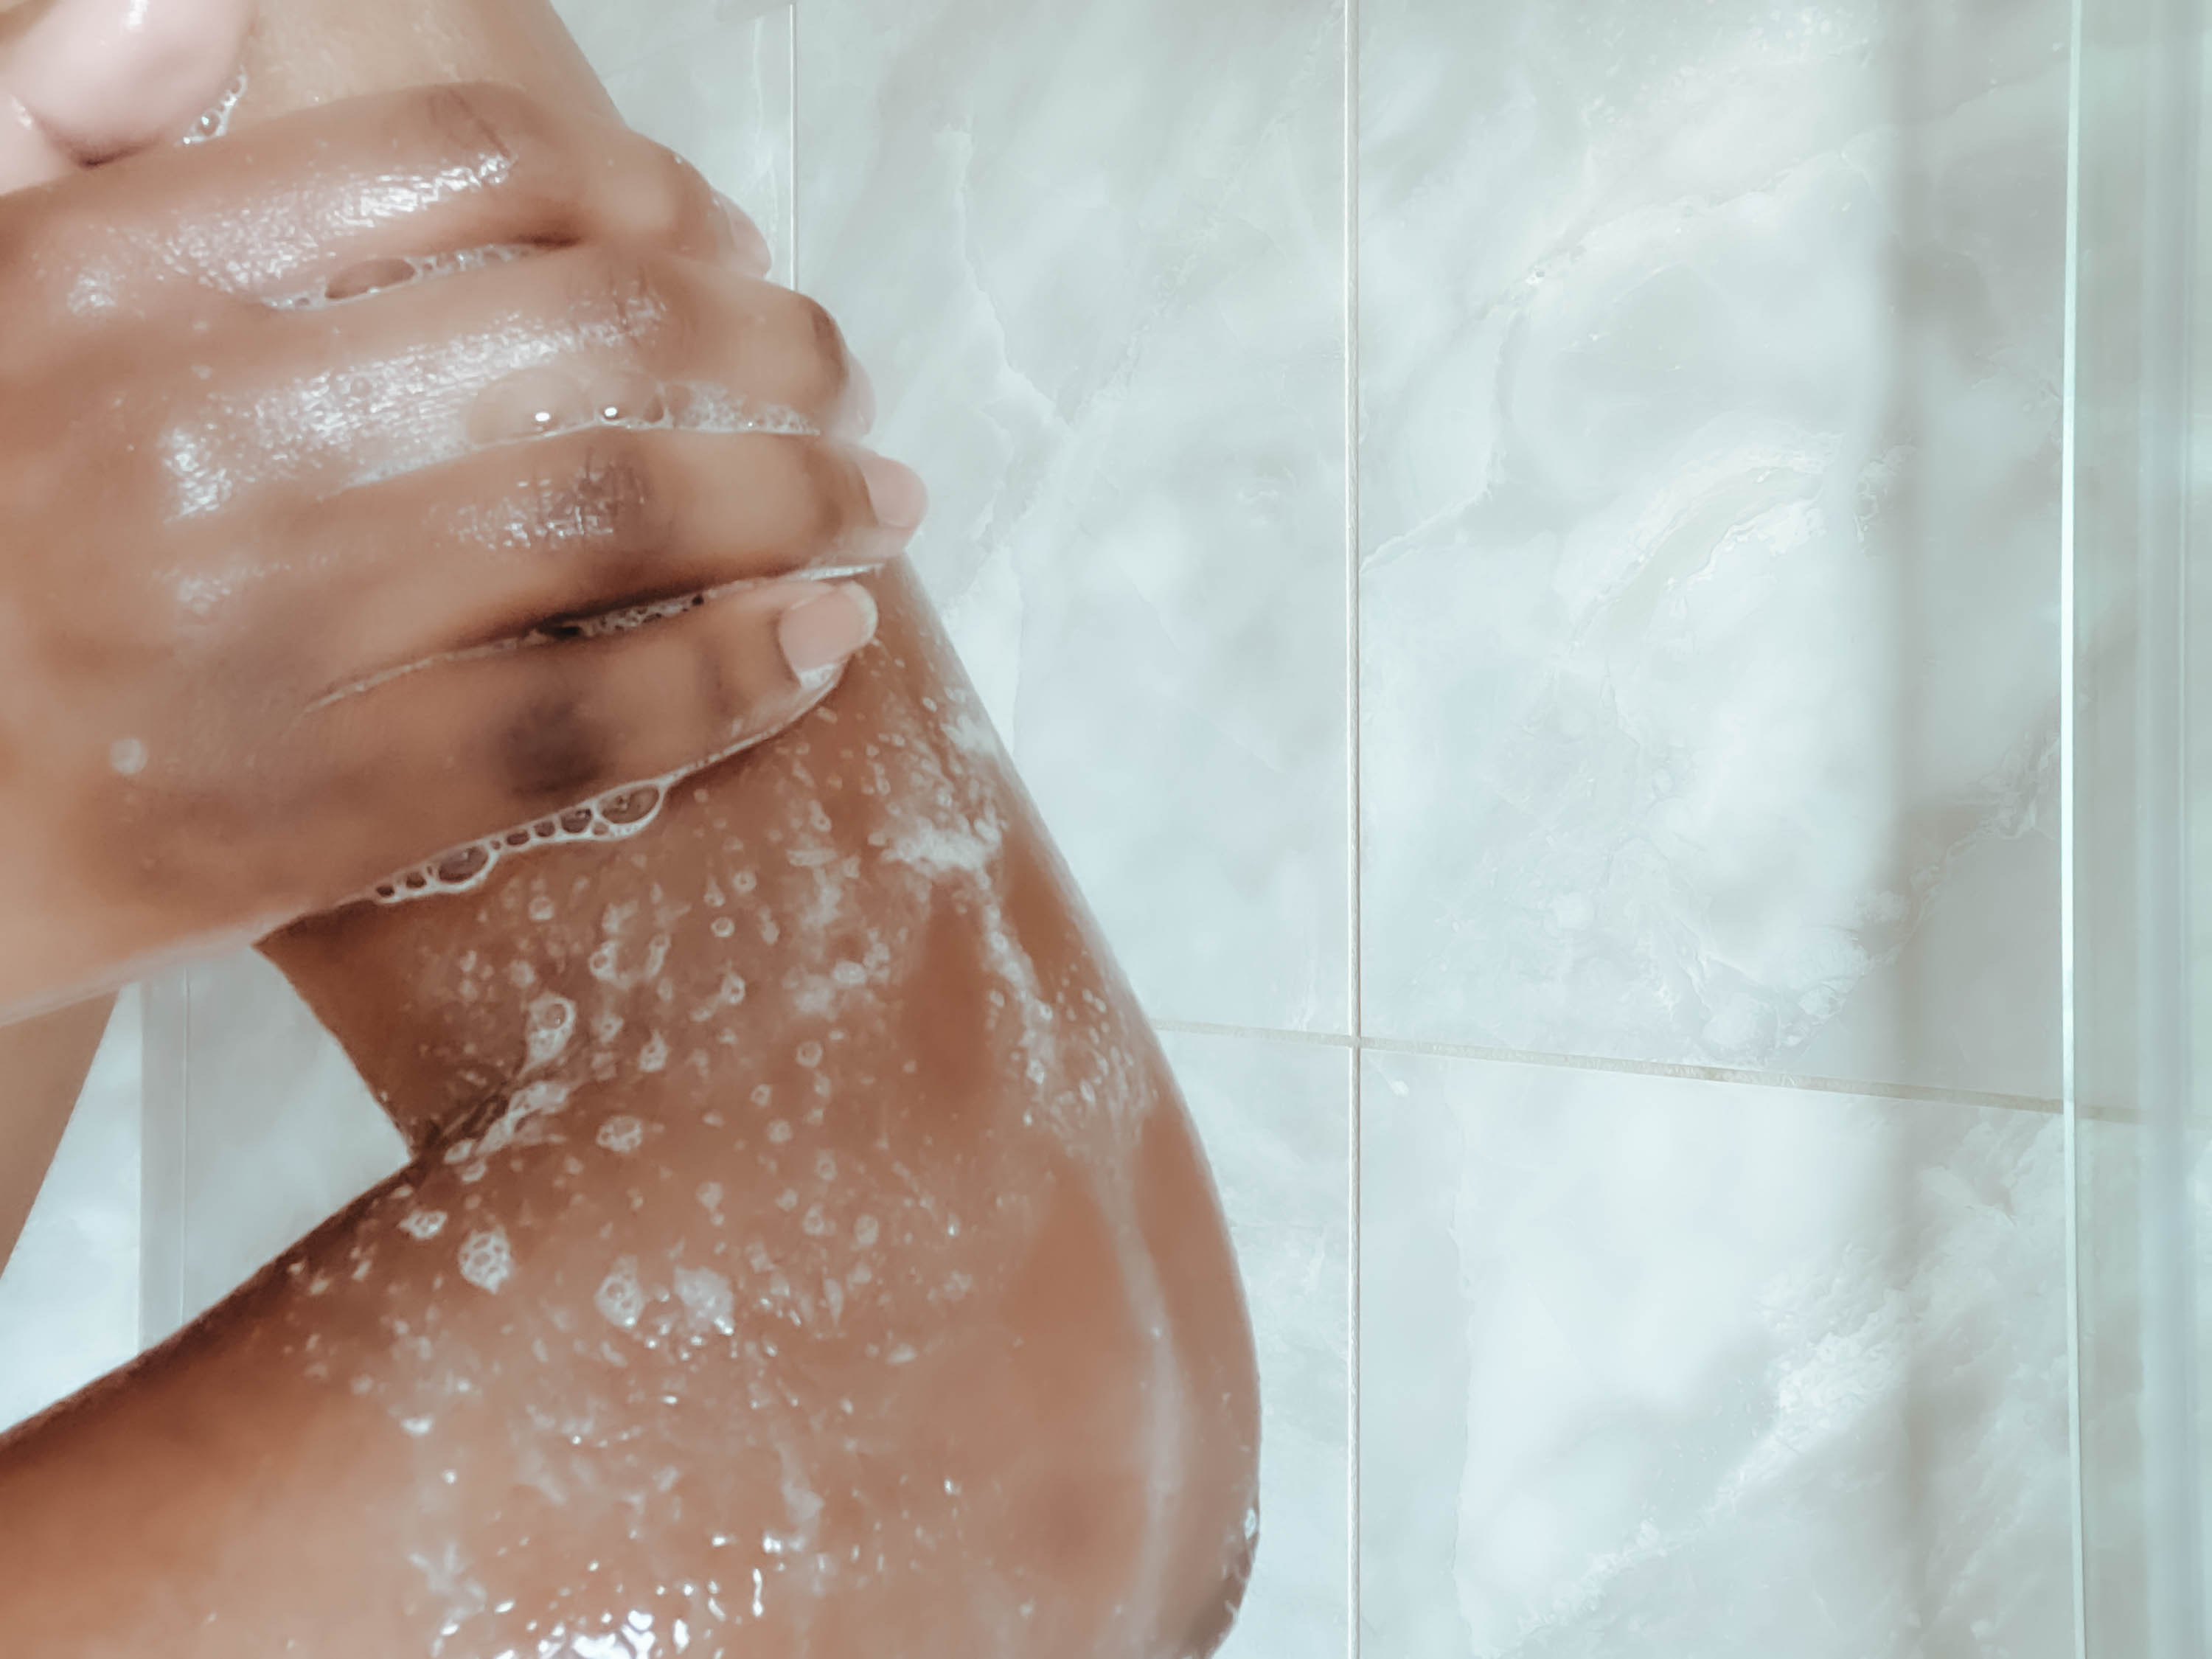 Close-up of person washing their upper body in the shower